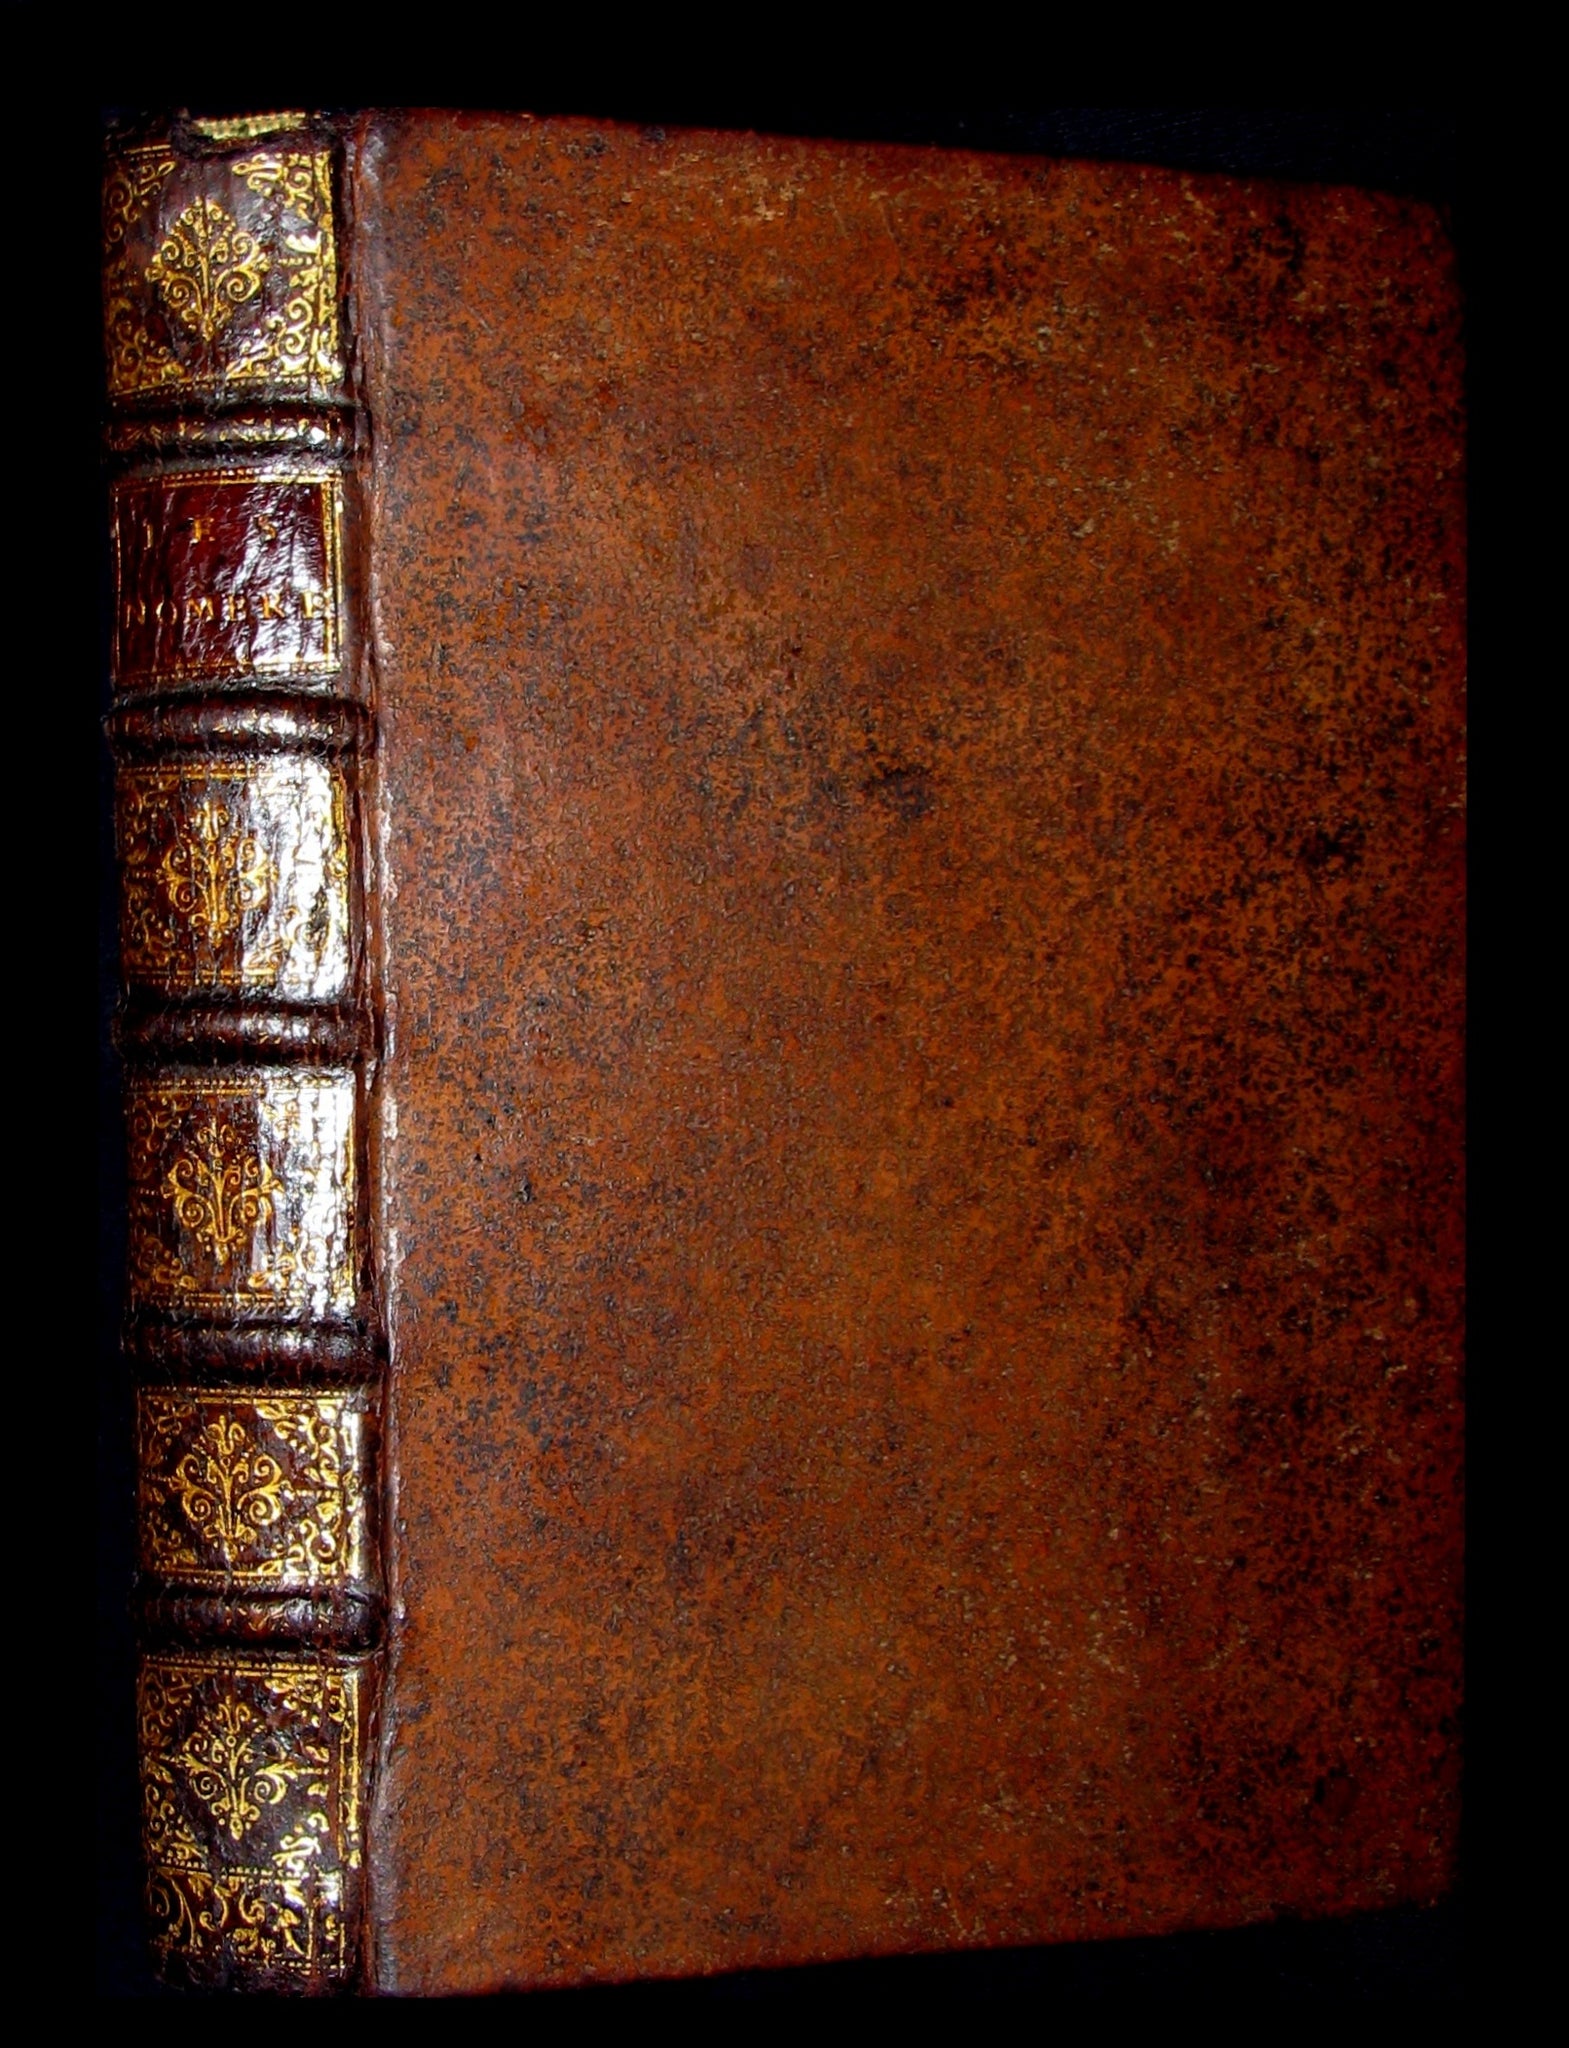 1685 Rare Latin French Bible - The Book of Numbers - Les NOMBRES by Le Maistre de Sacy